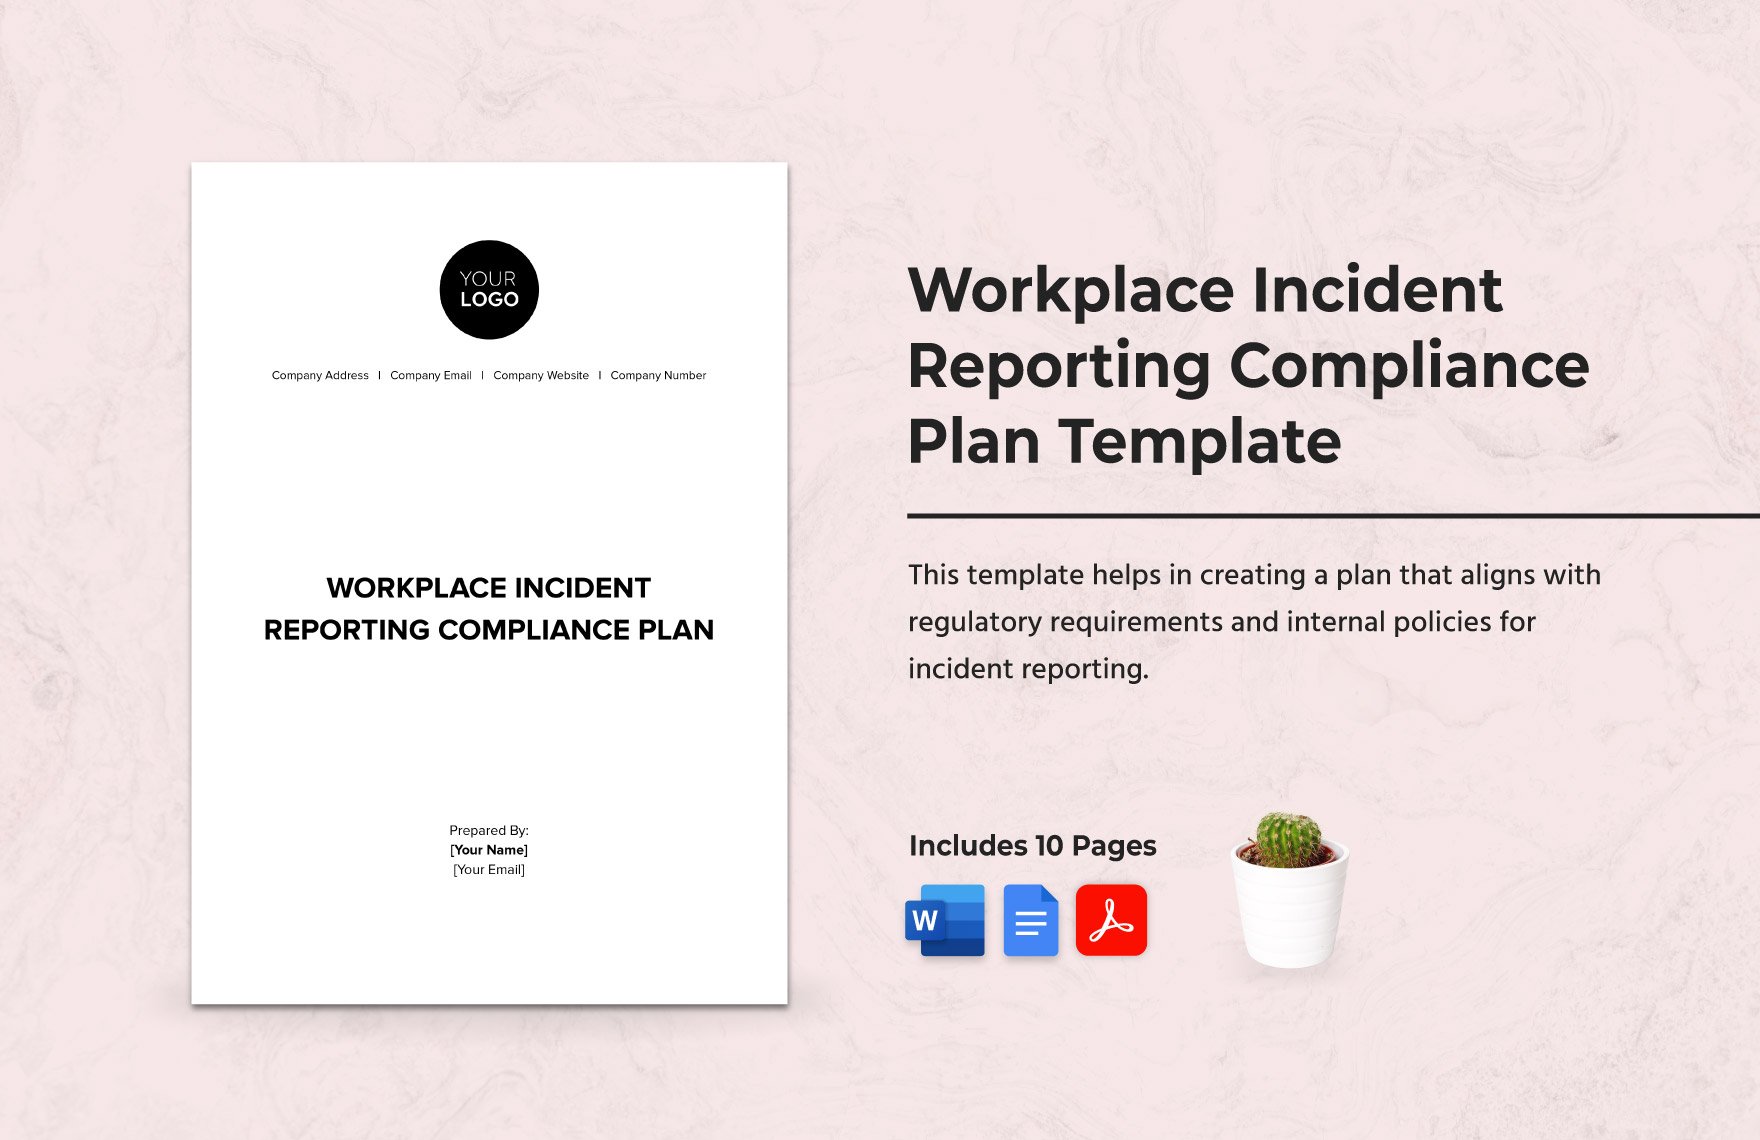 Workplace Incident Reporting Compliance Plan Template